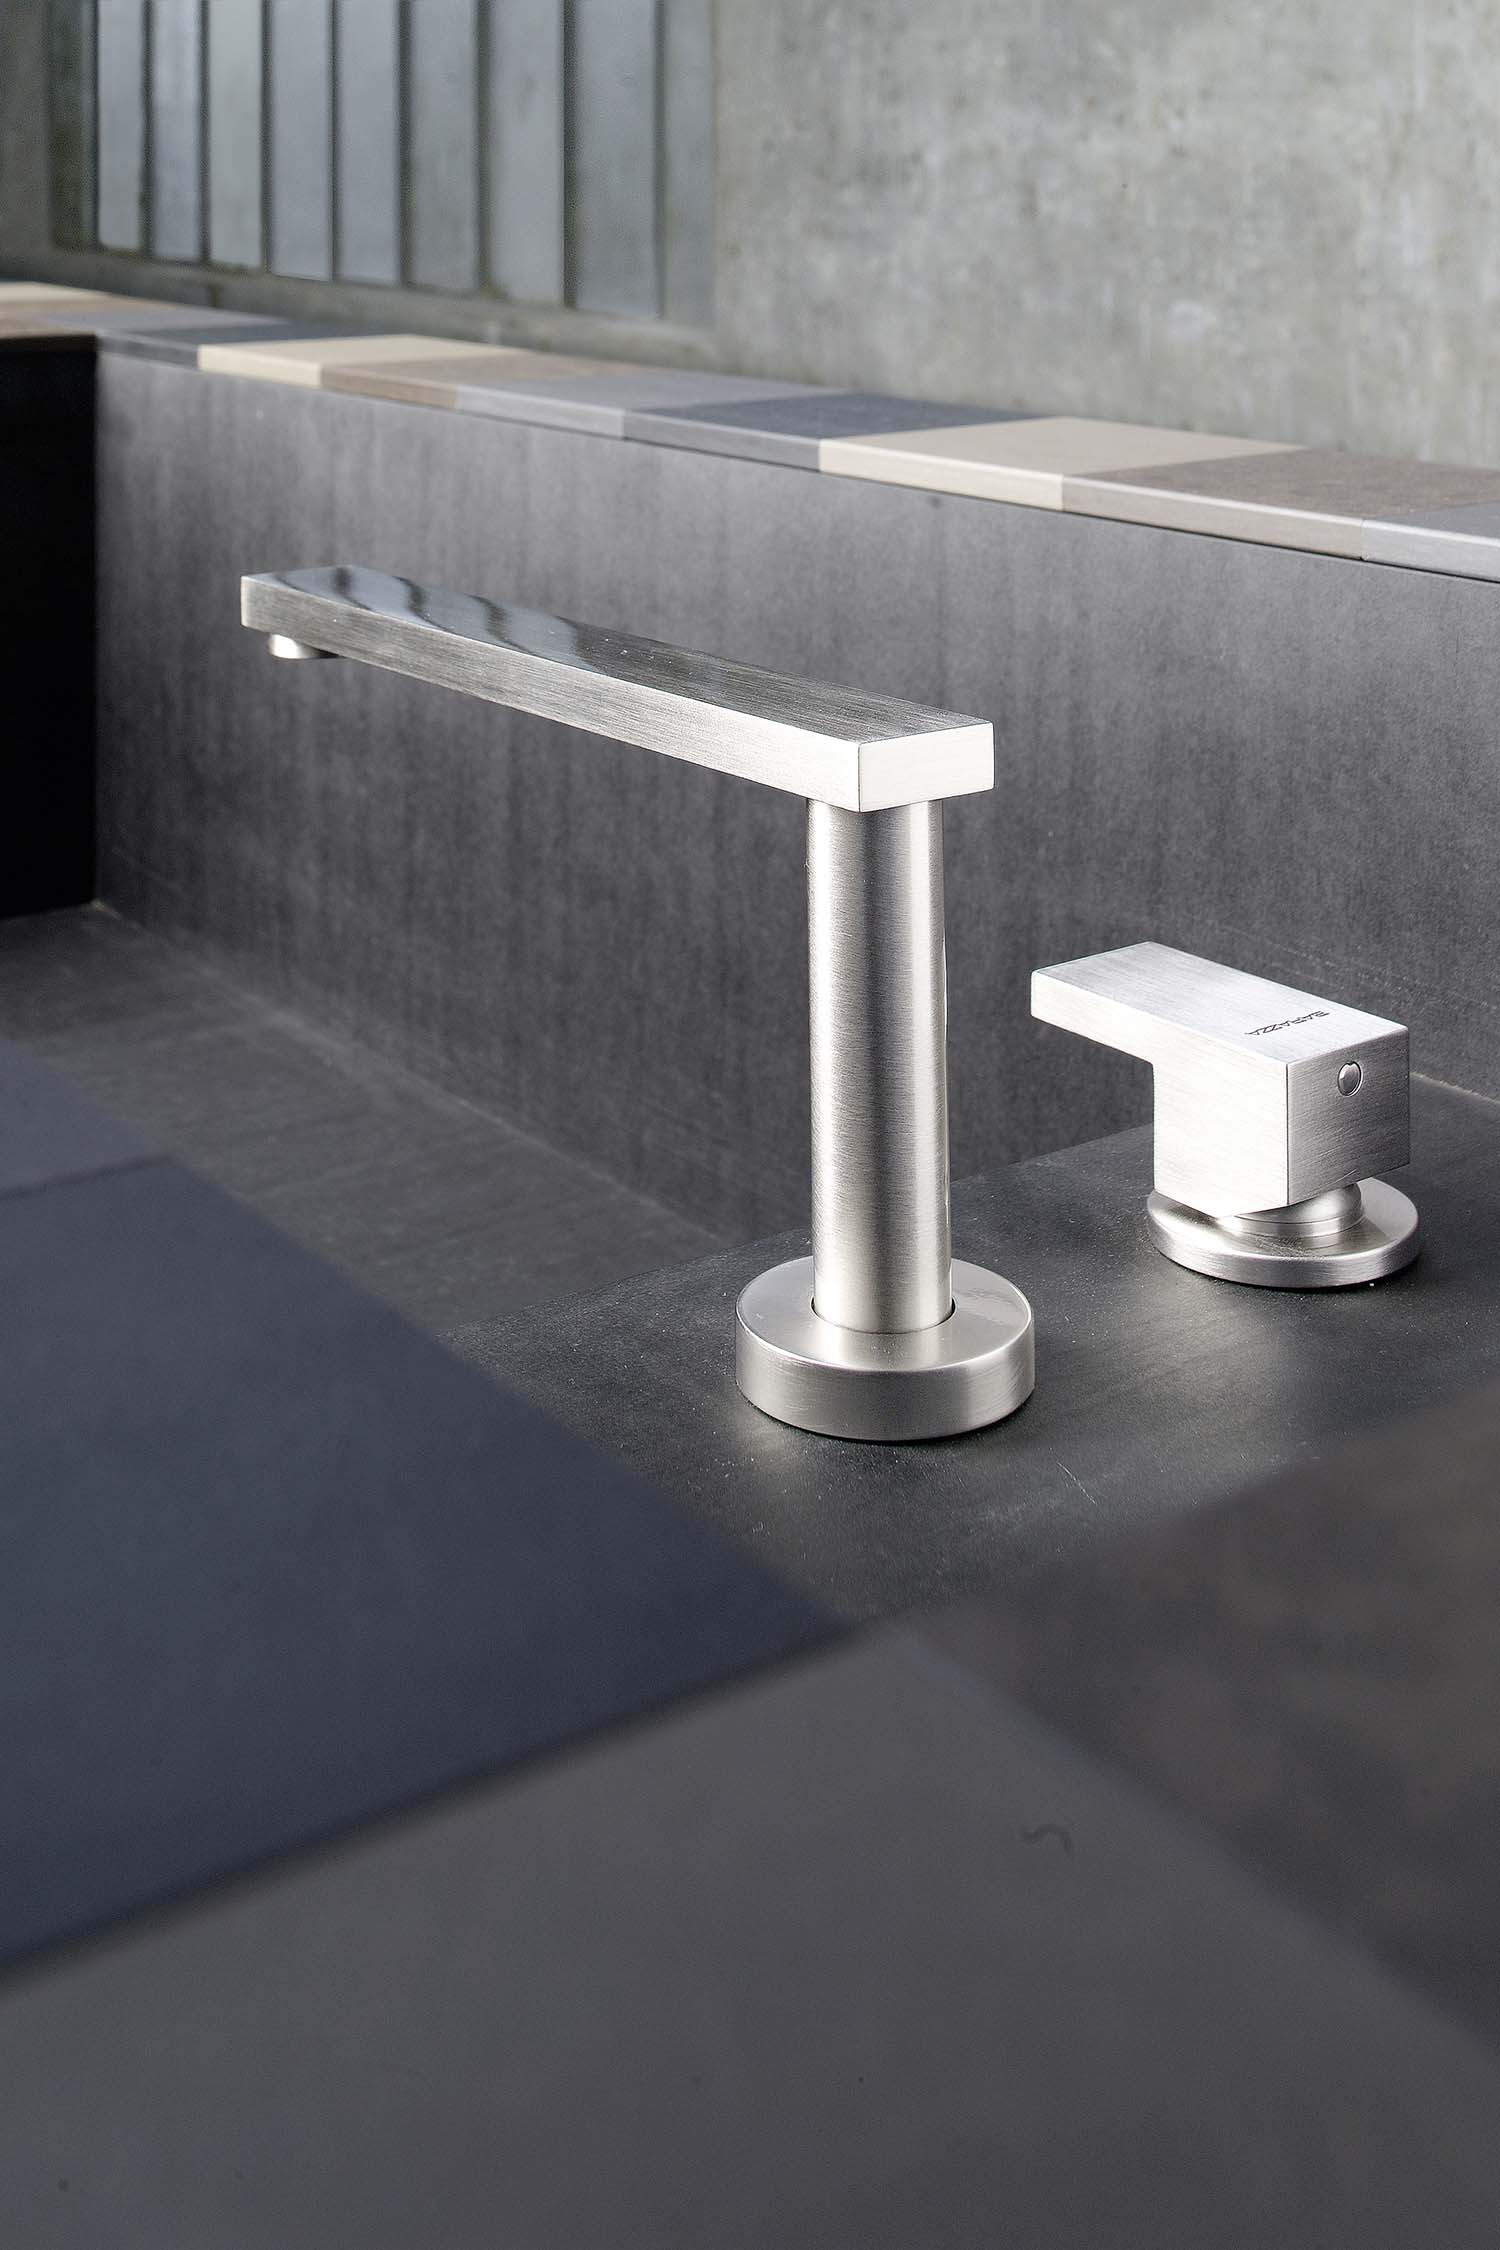 Modern and minimal Barazza® brushed stainless steel tap in luxury kitchen design.